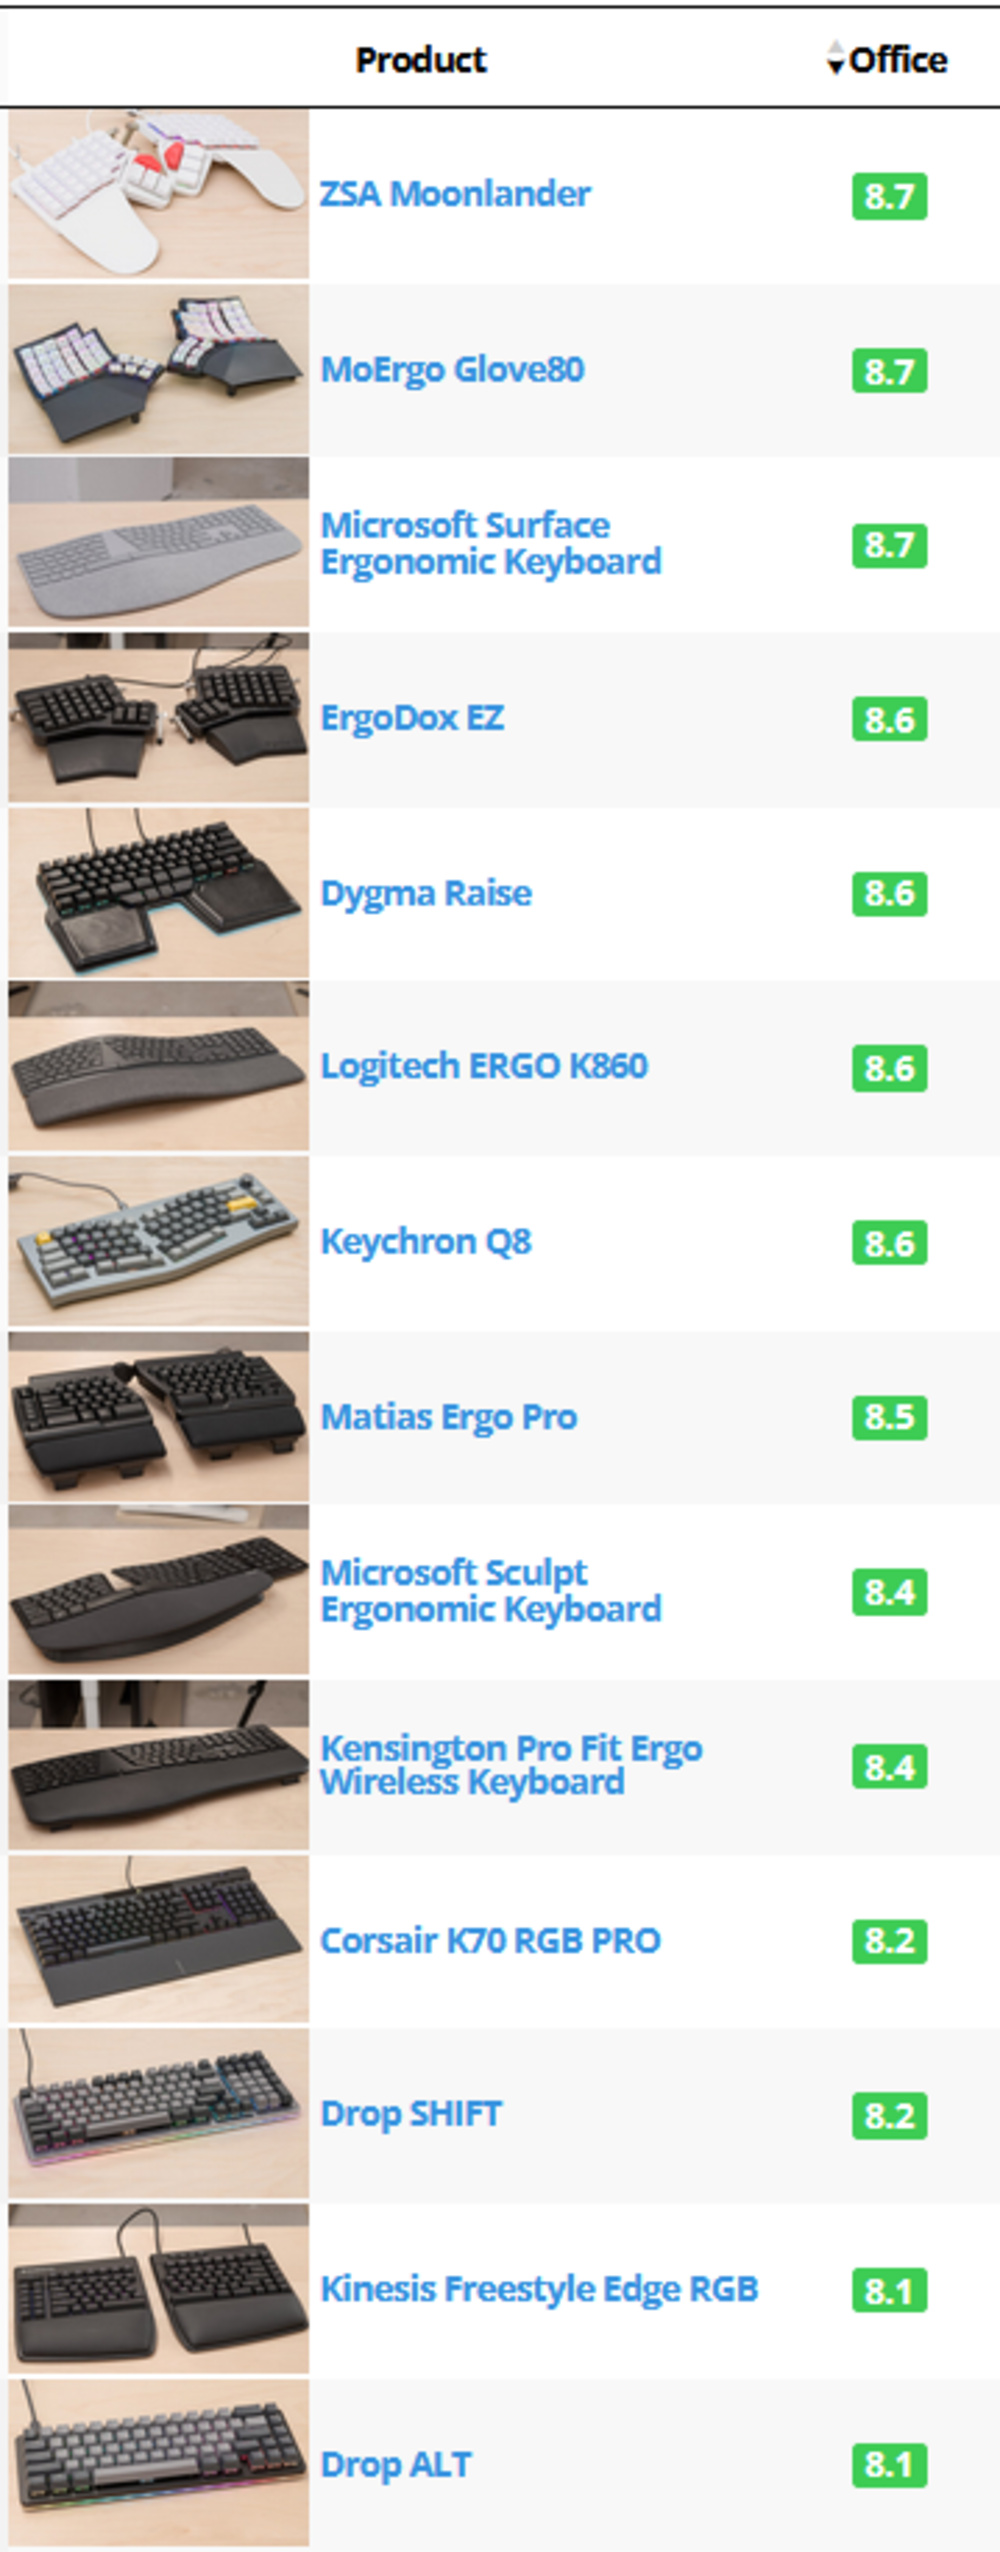 A table view of the highest scoring office keyboards on our old methodology.